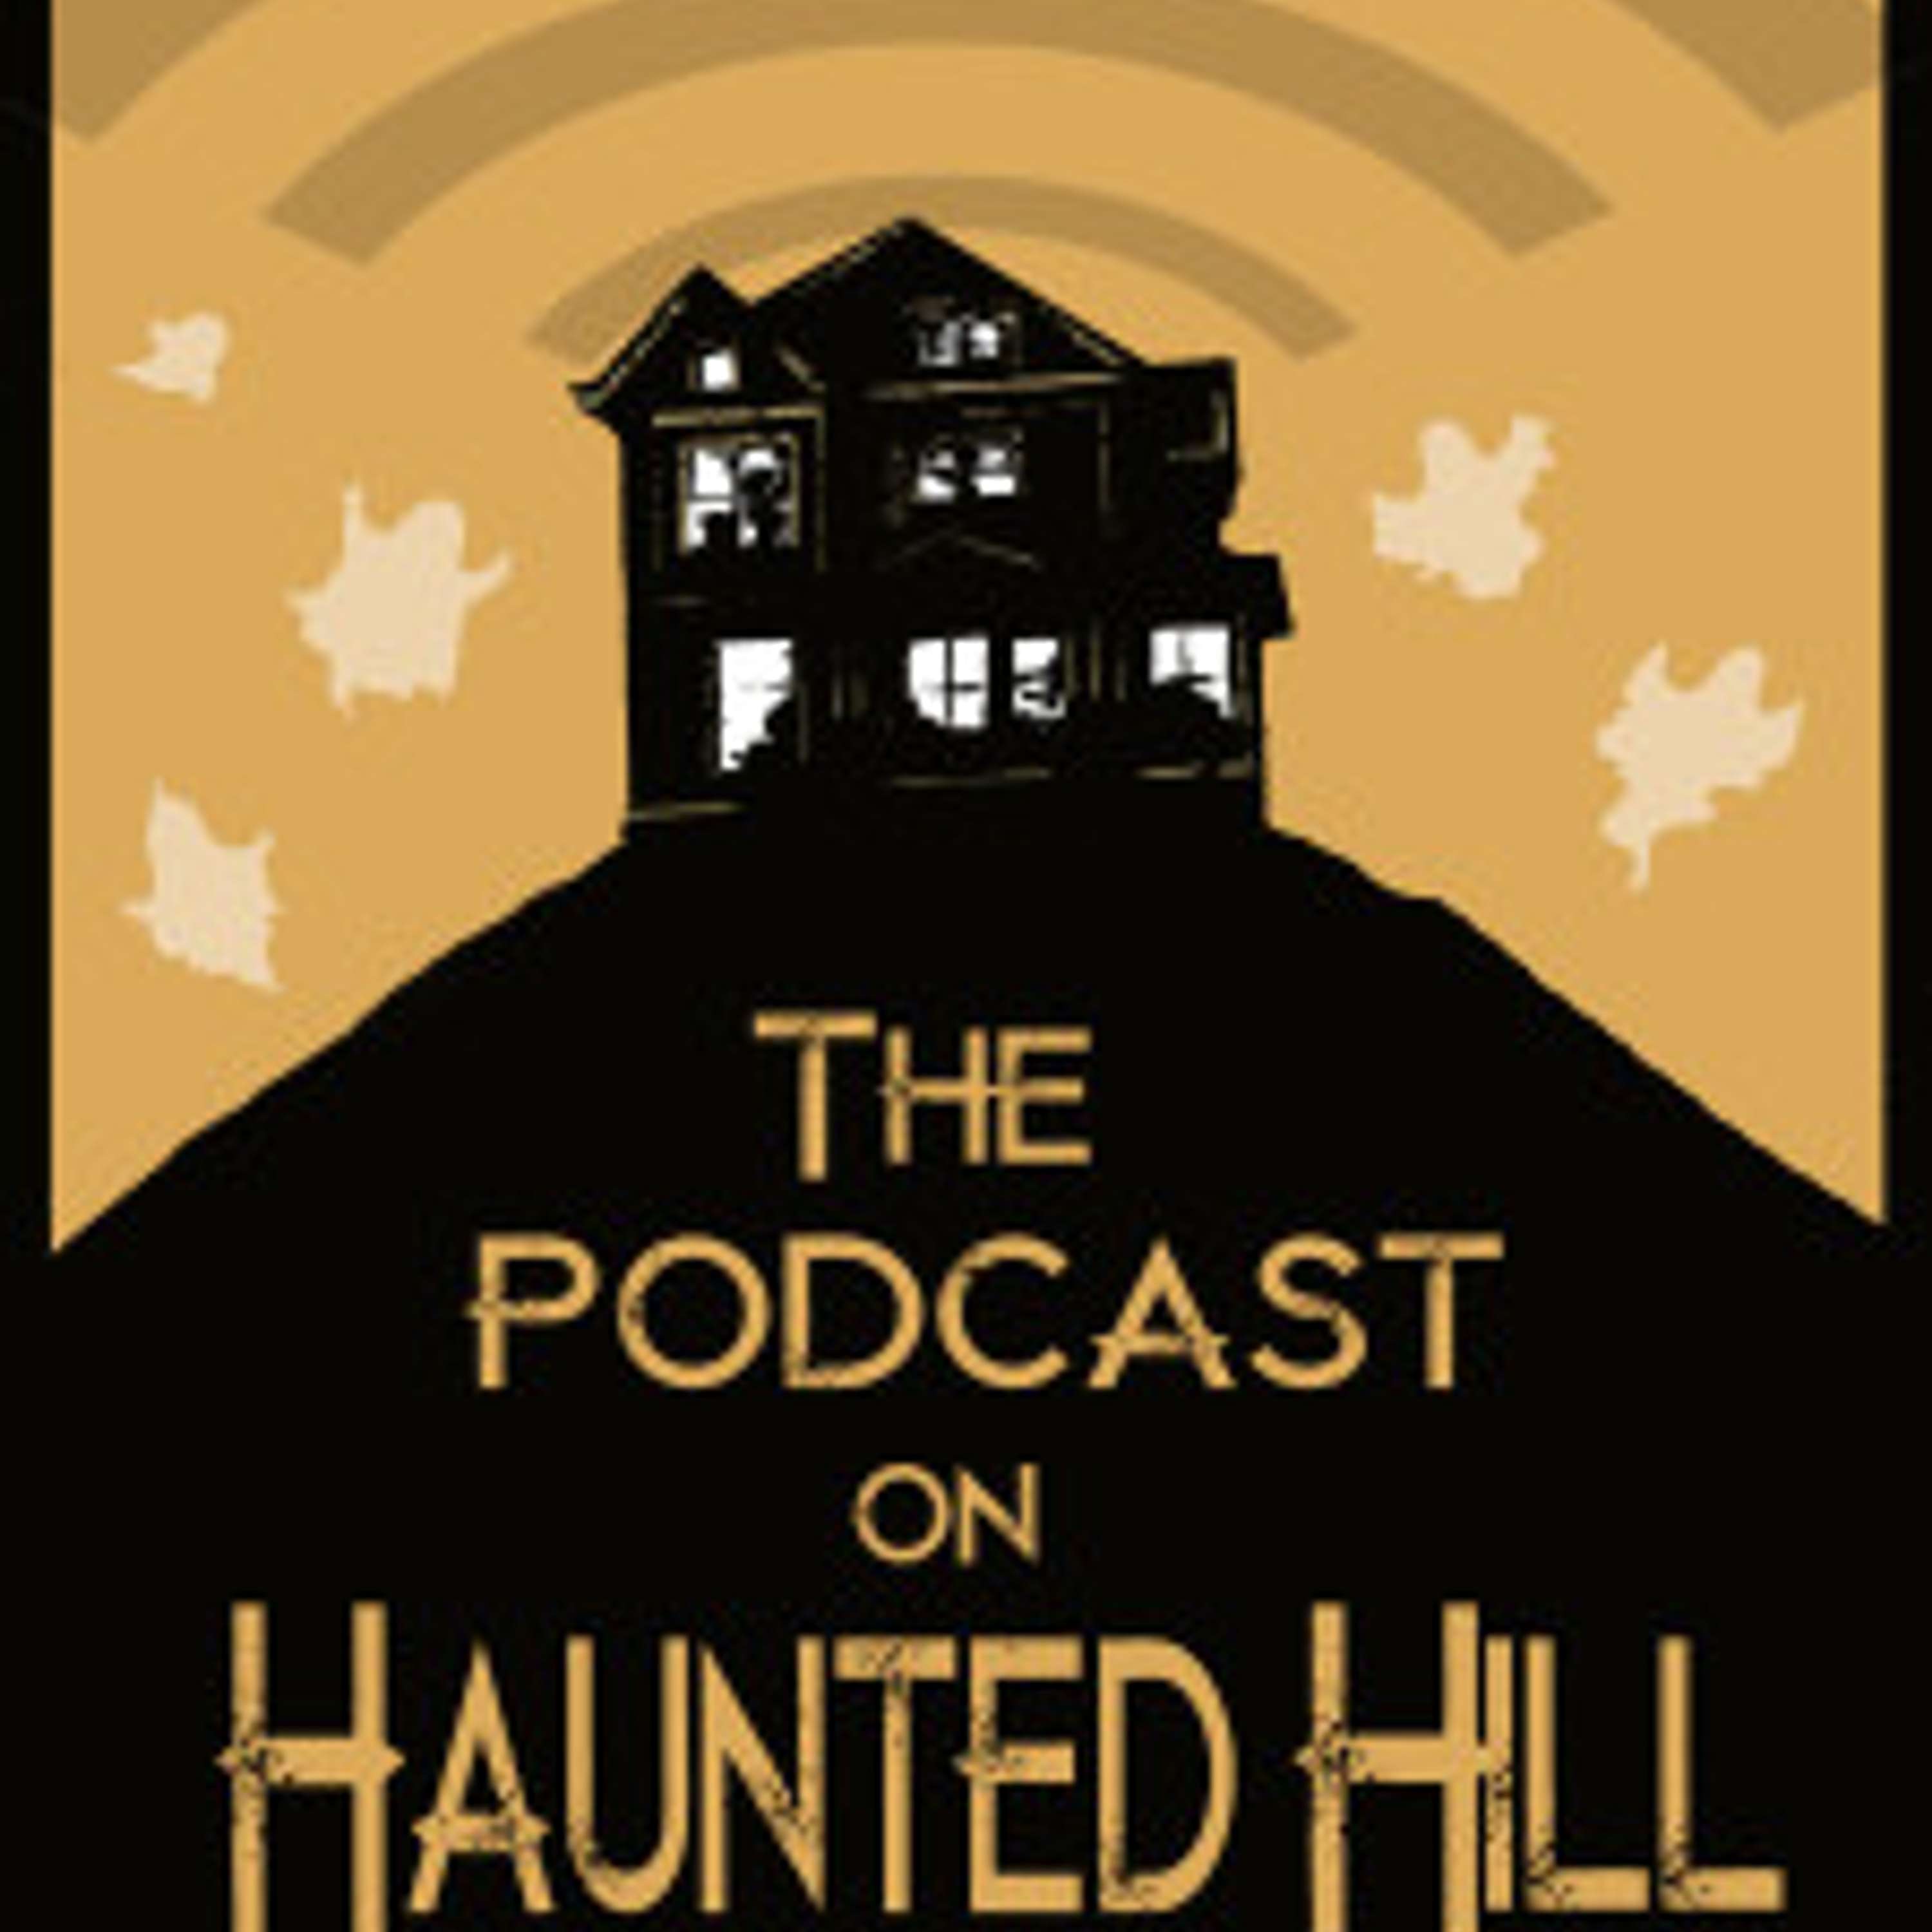 THE PODCAST ON HAUNTED HILL EPISODE 59 – ALIENS 4 AND CRITTERS 4